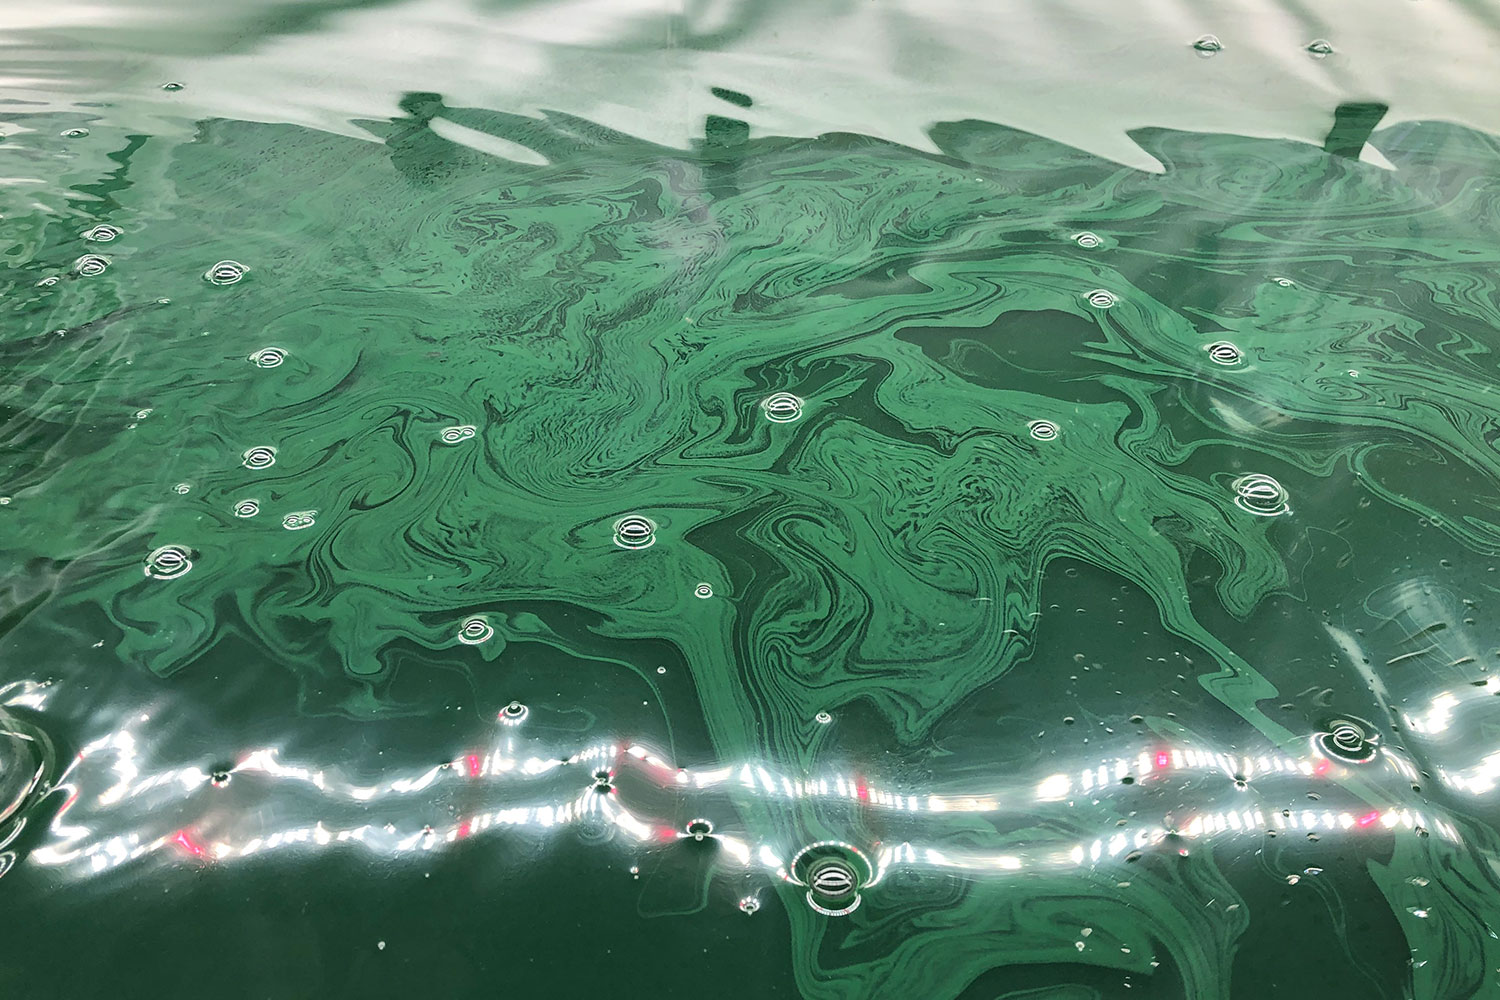 Surface of water full of green swirls and bubbles